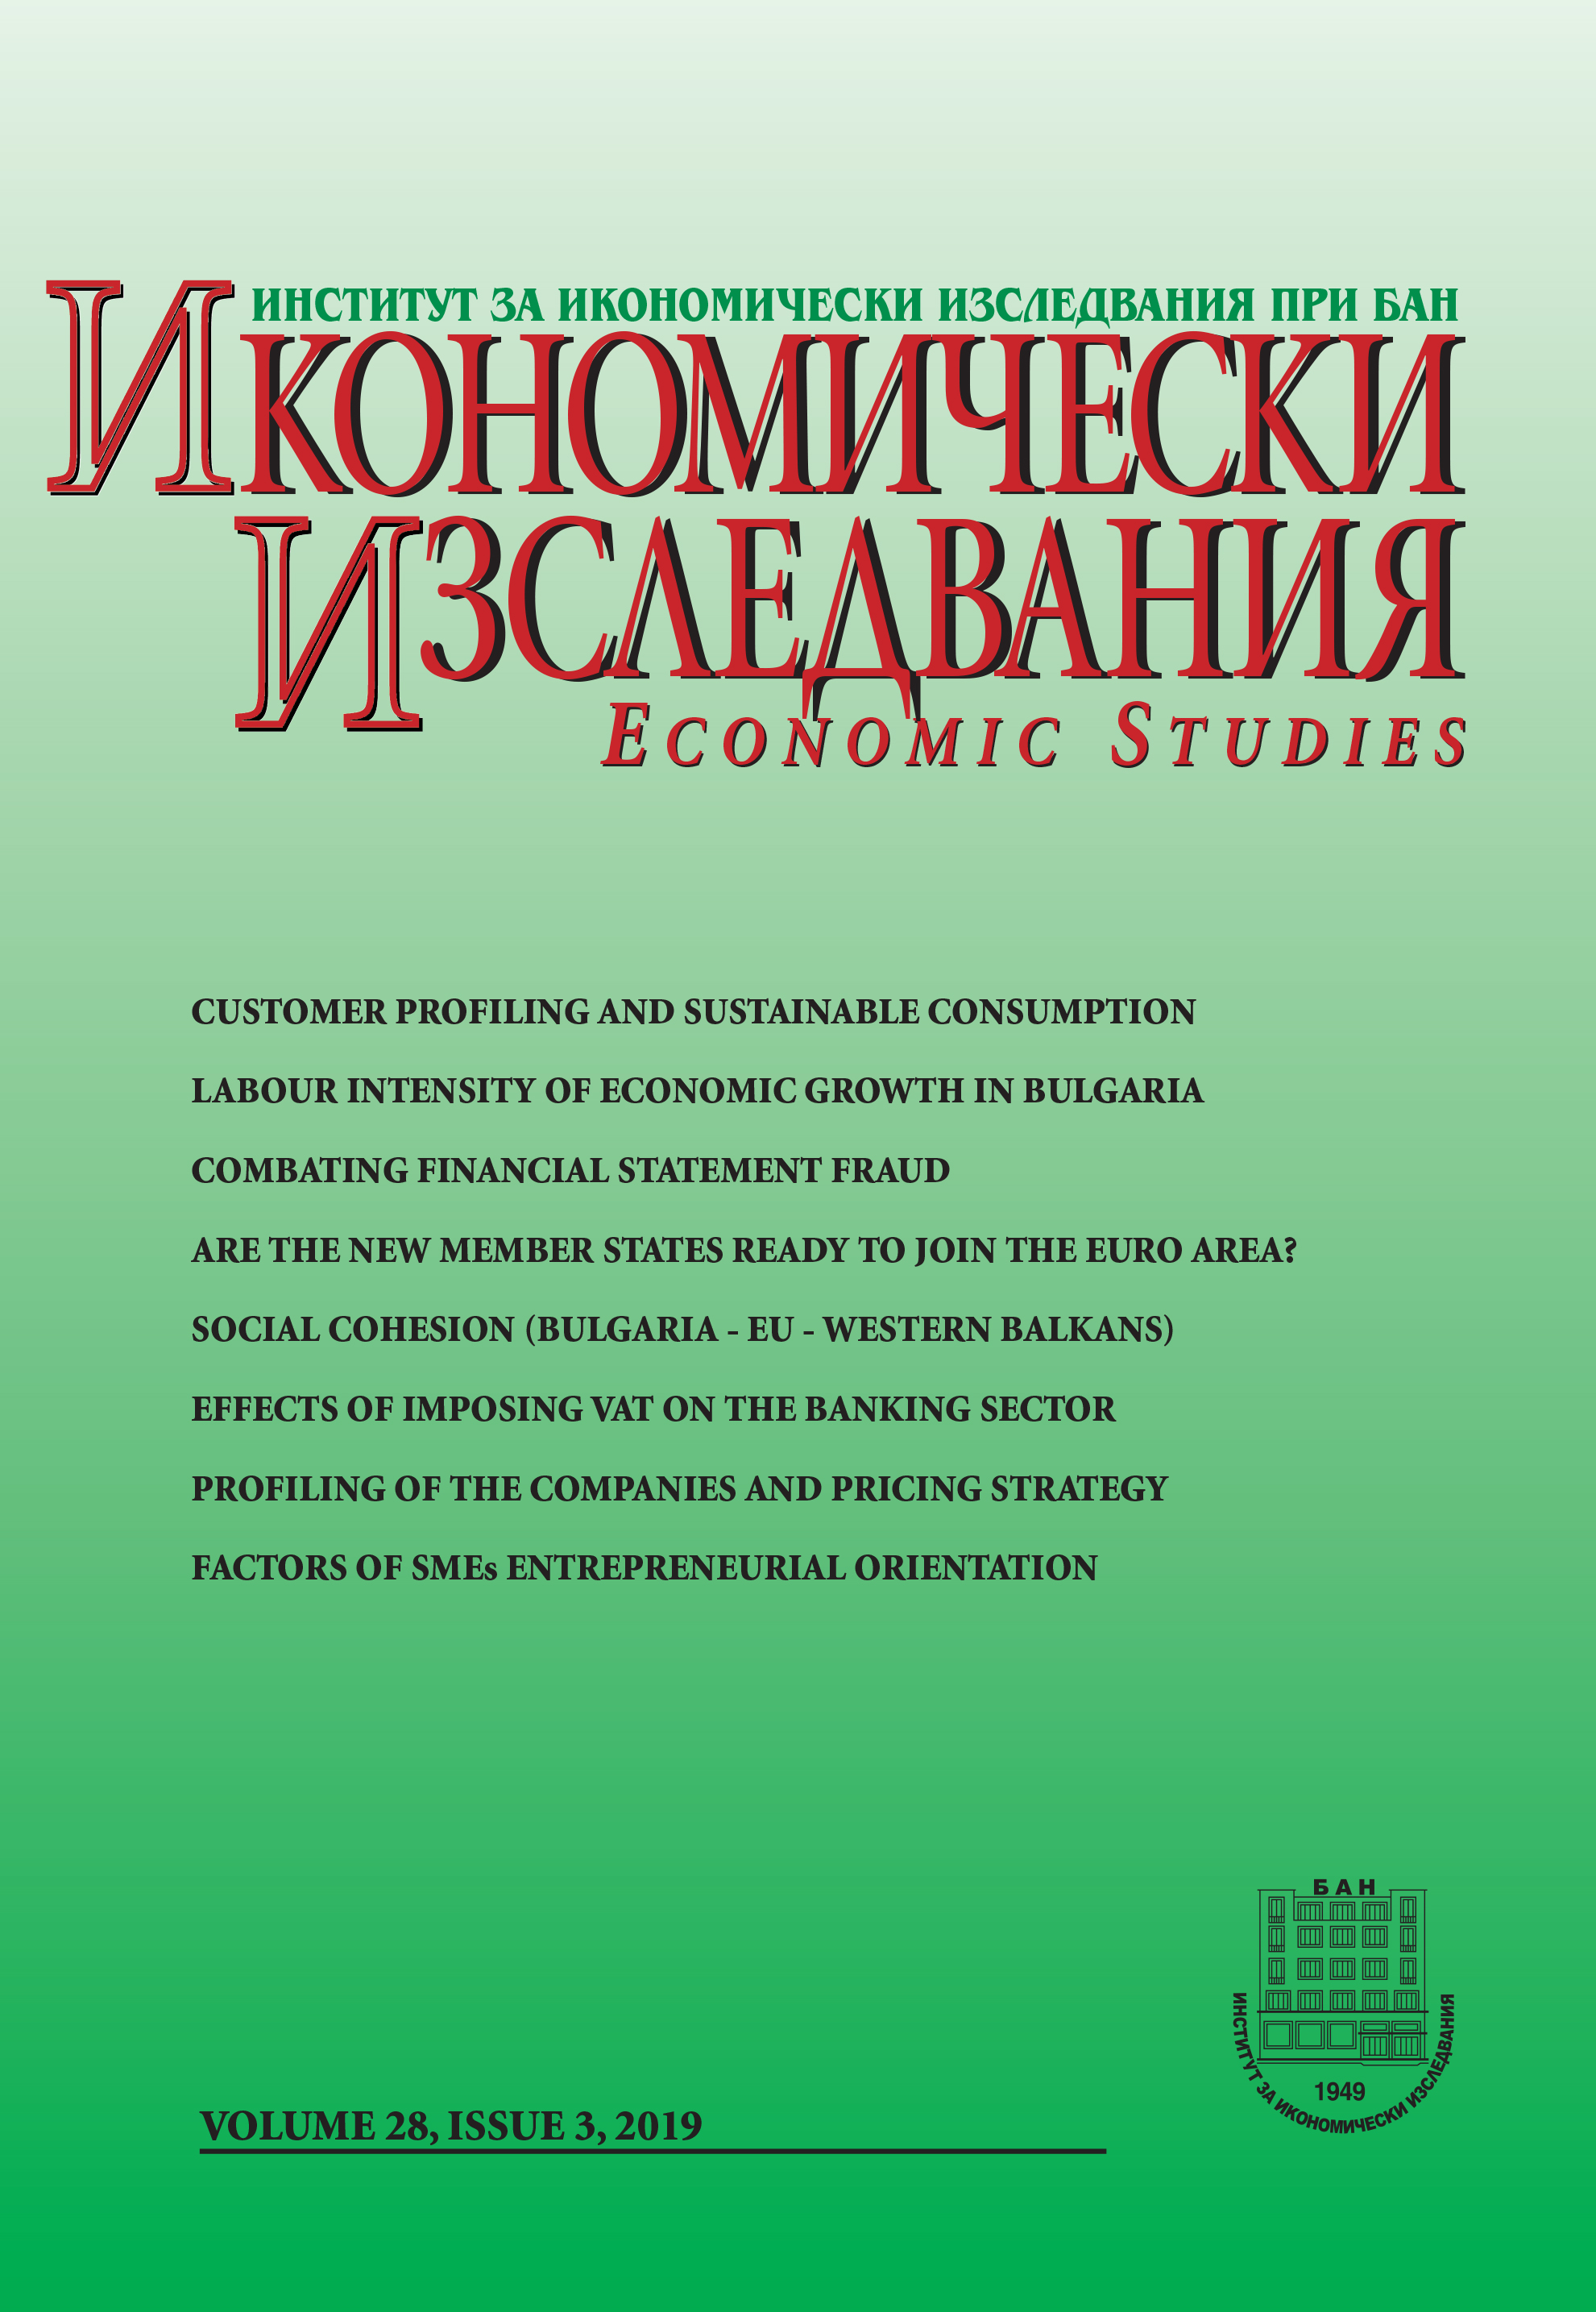 Assessing the Effects of Imposing VAT on the Services Provided by the Banking Sector – The Case of Bulgaria Cover Image